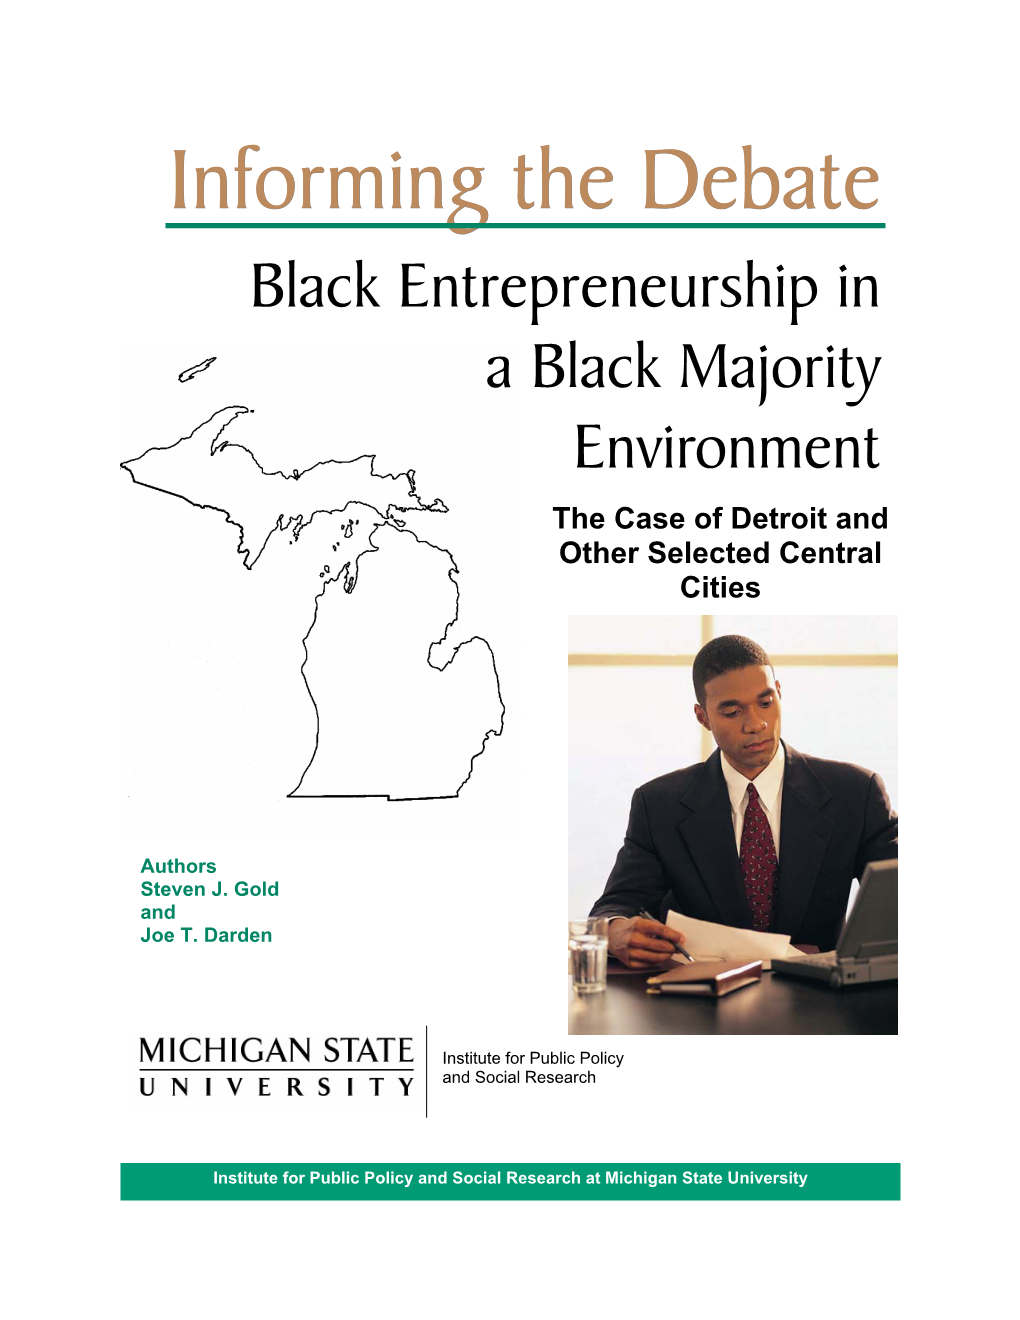 Black Entrepreneurship in a Black Majority Environment the Case of Detroit and Other Selected Central Cities